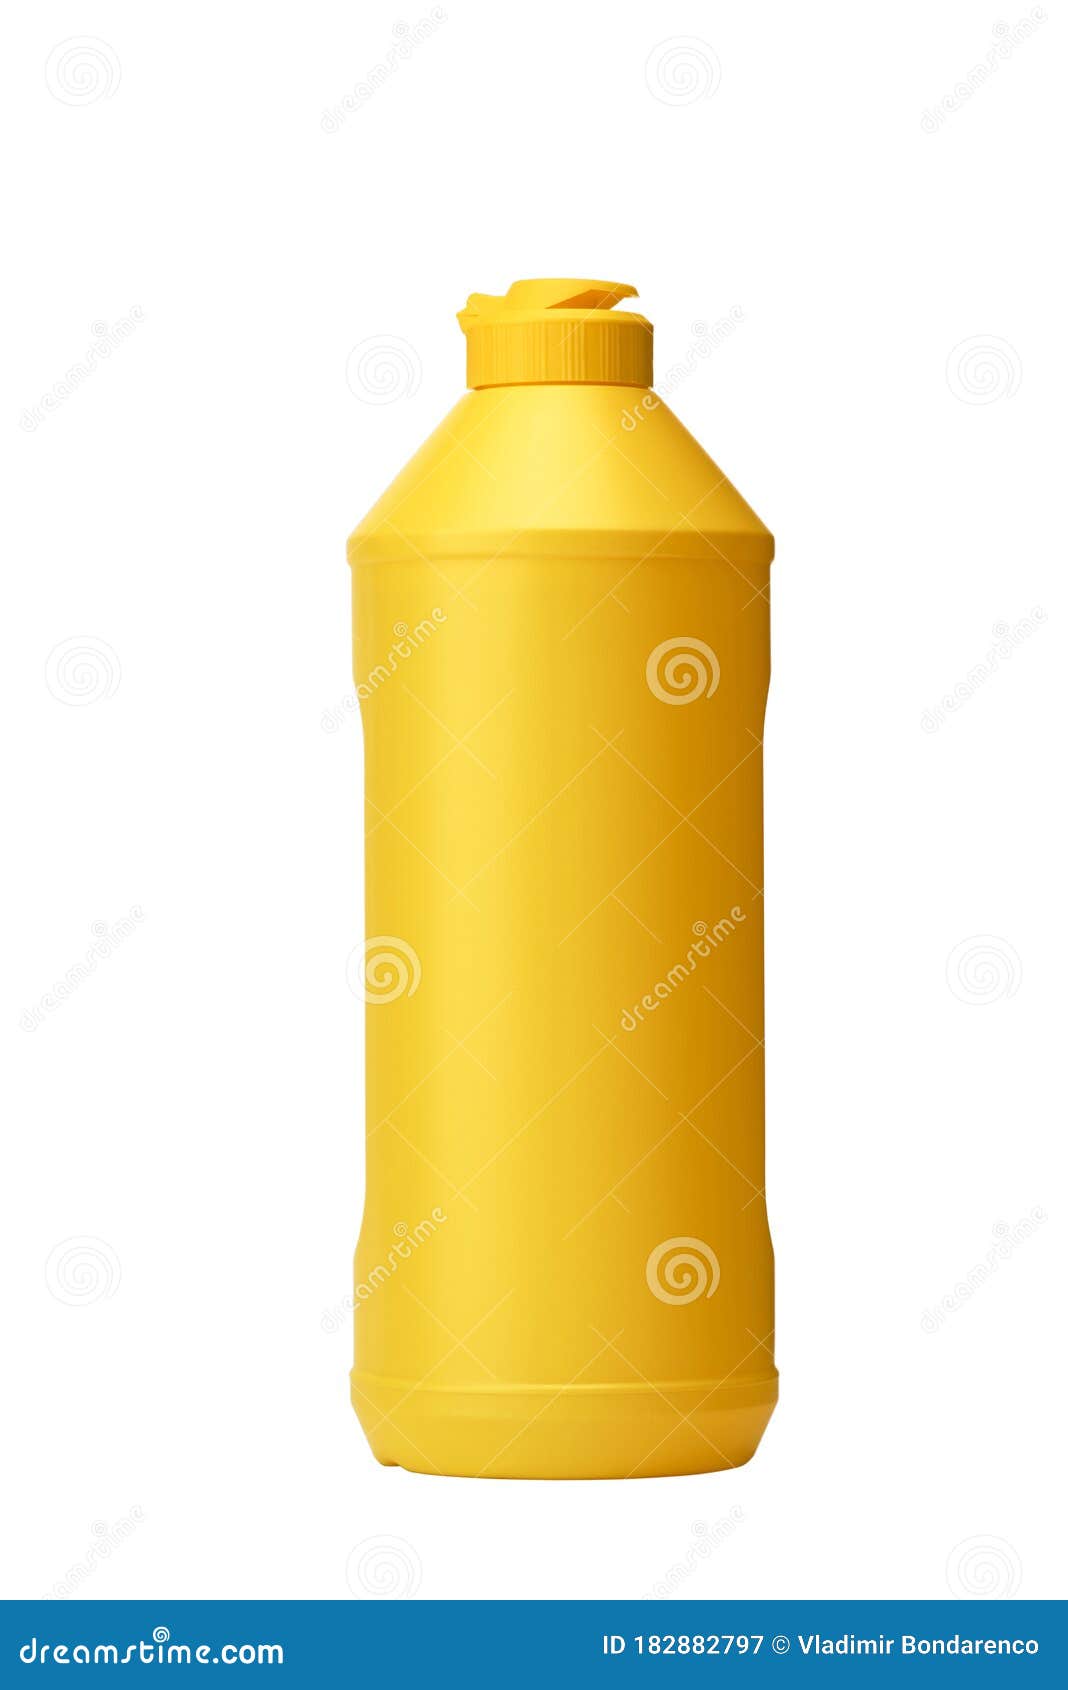 Download 7 115 Yellow Detergent Bottle Photos Free Royalty Free Stock Photos From Dreamstime Yellowimages Mockups